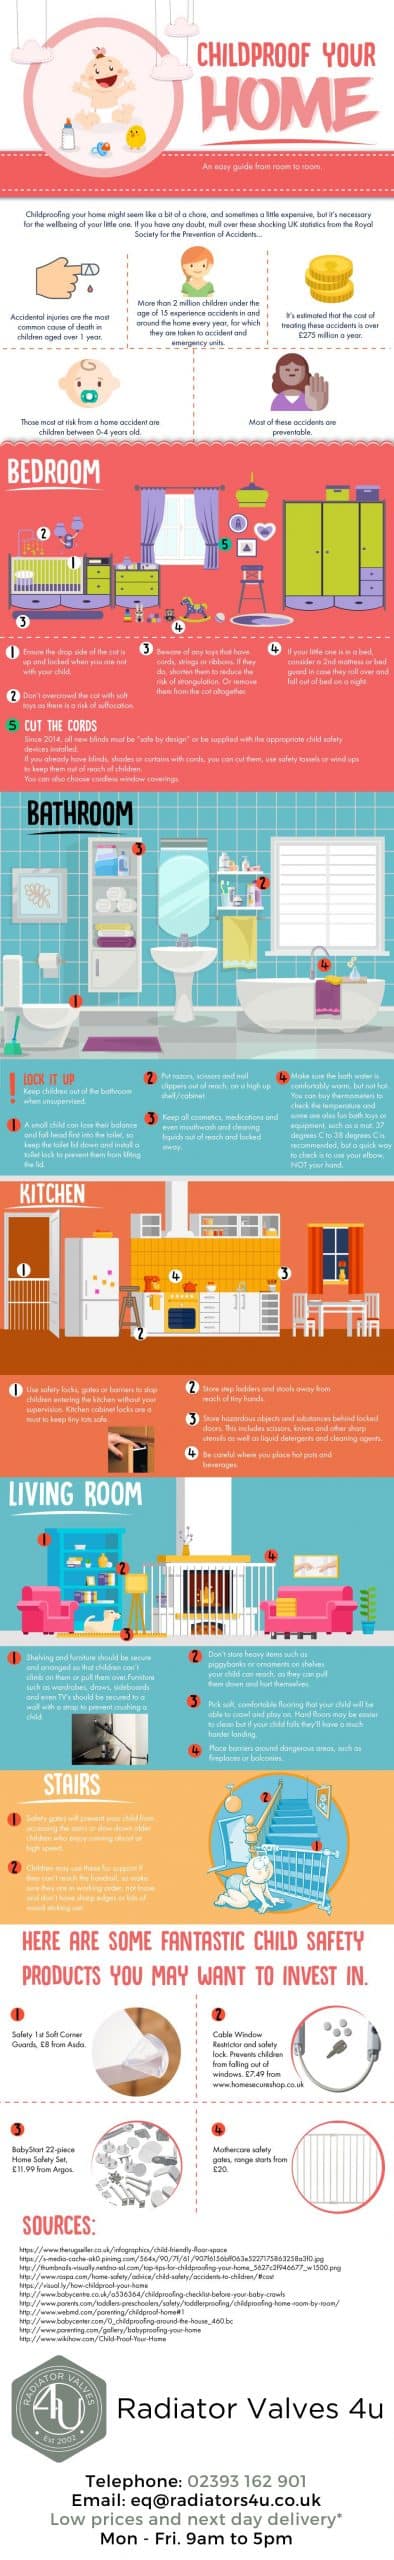 An easy guide to childproof your home room by room